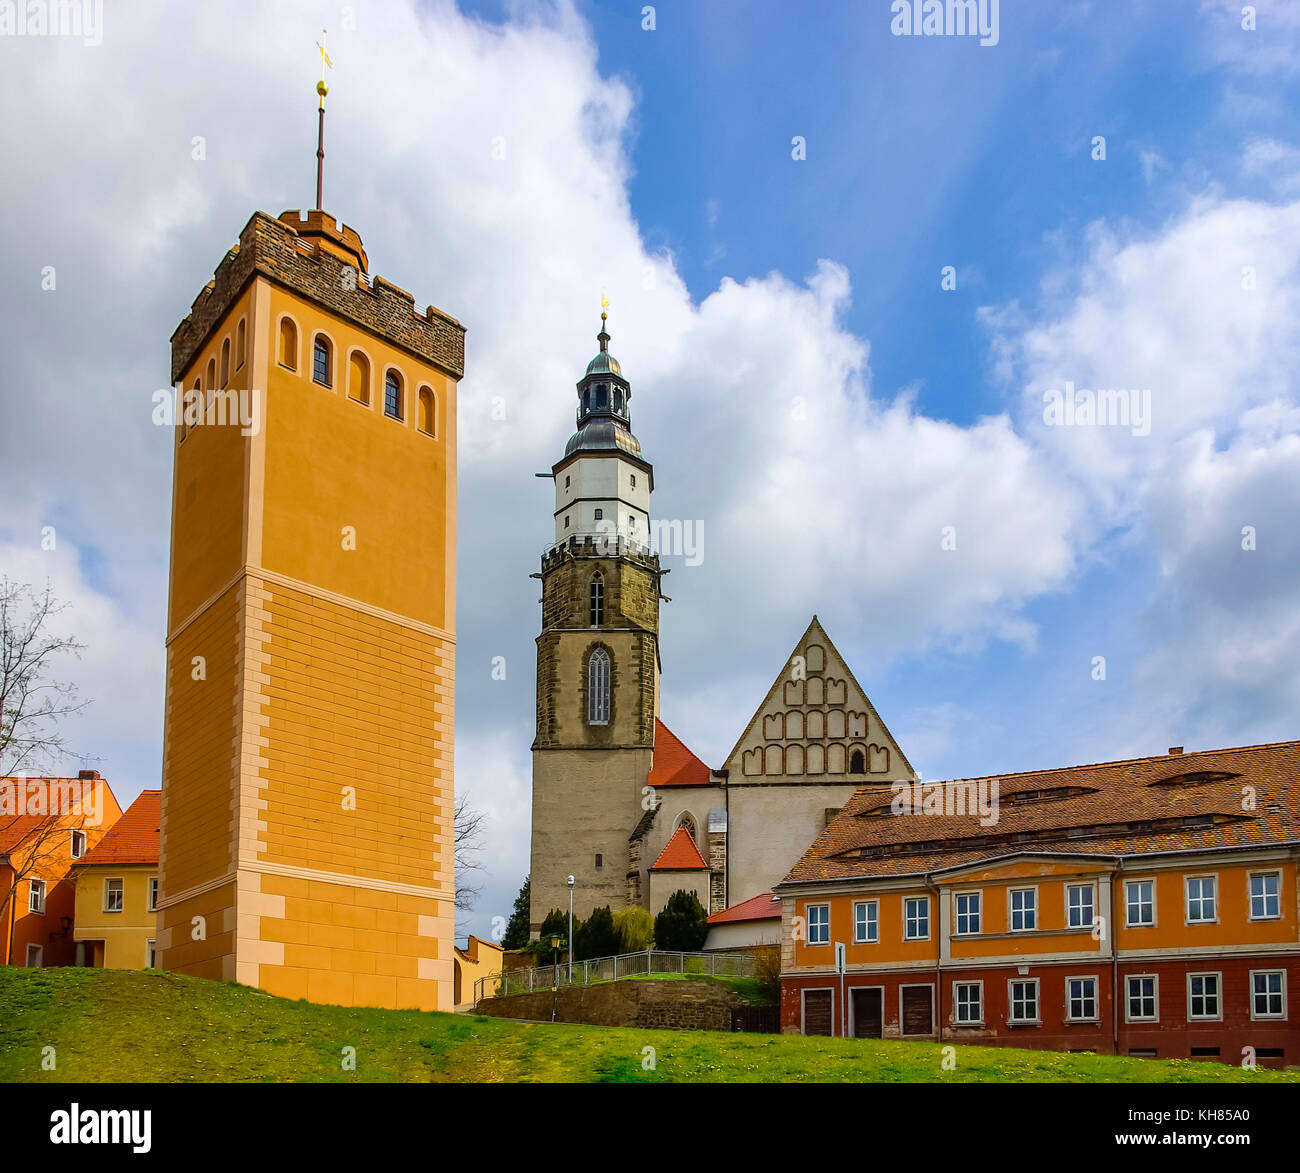 The Roter Turm (Red Tower) and Protestant Church St. Marien, Kamenz, Saxony, Germany. Stock Photo